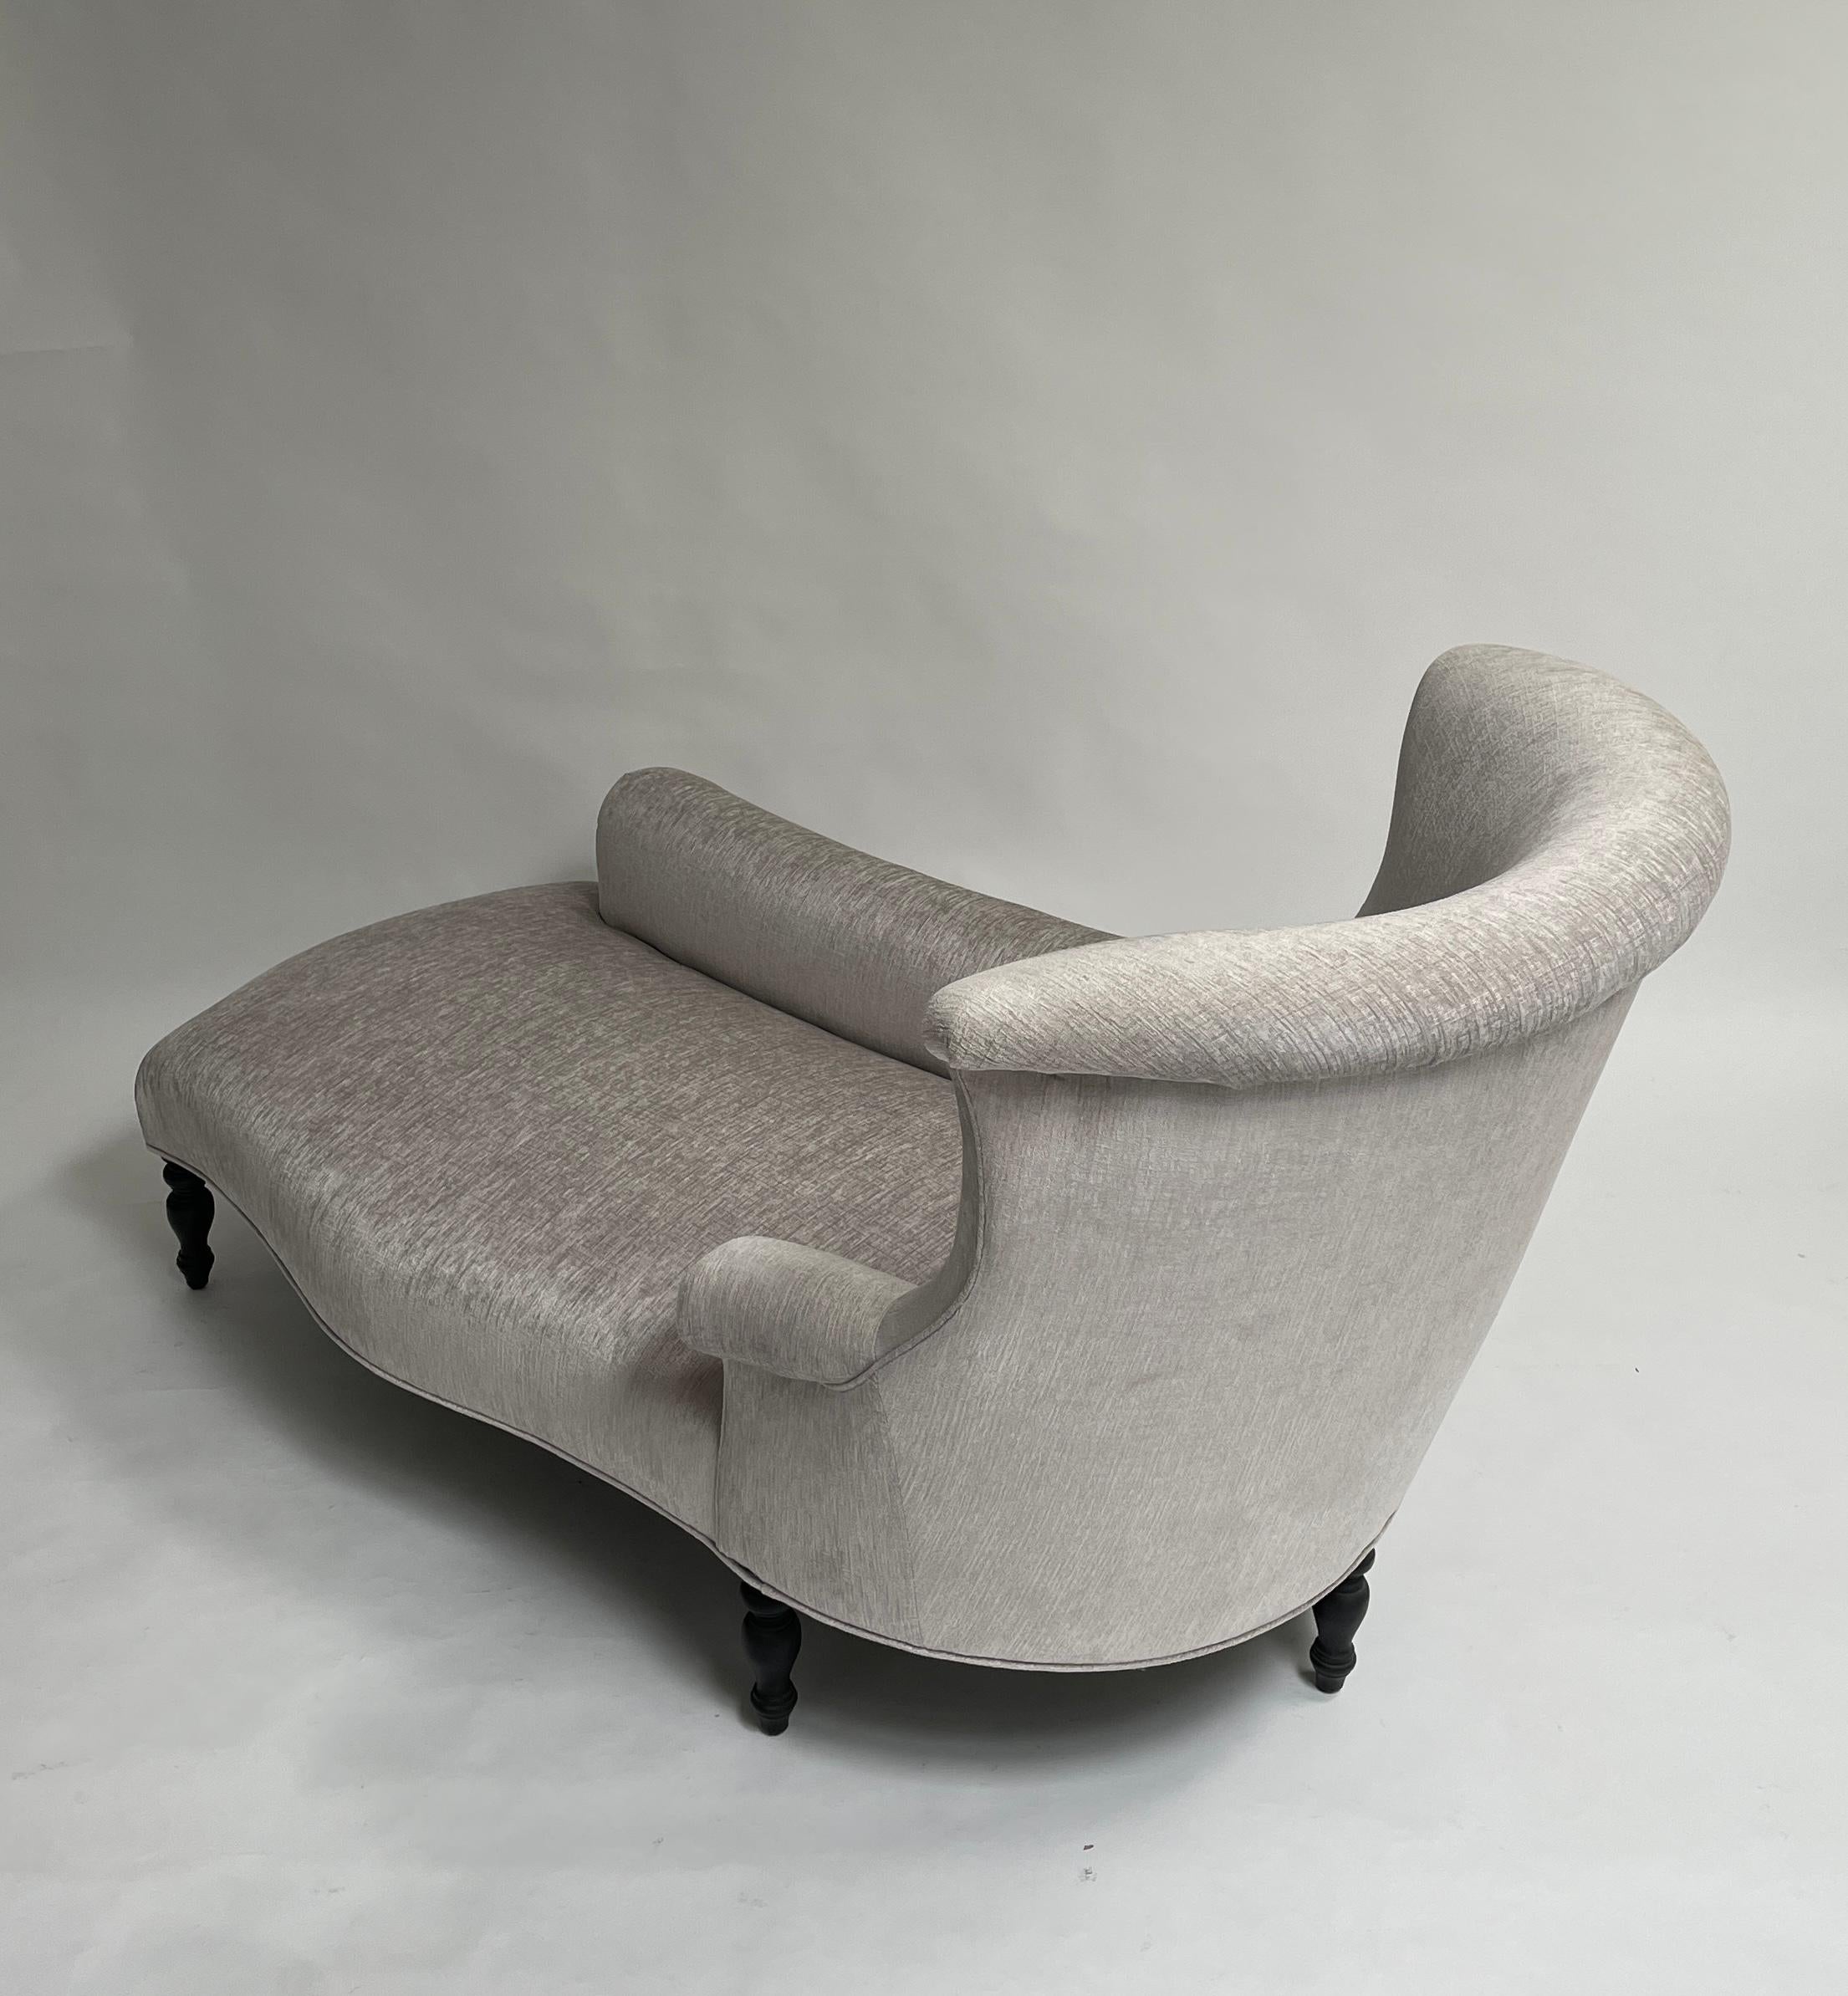 Upholstery Garronne Chaise Lounge by Bourgeois Boheme Atelier, Silver For Sale